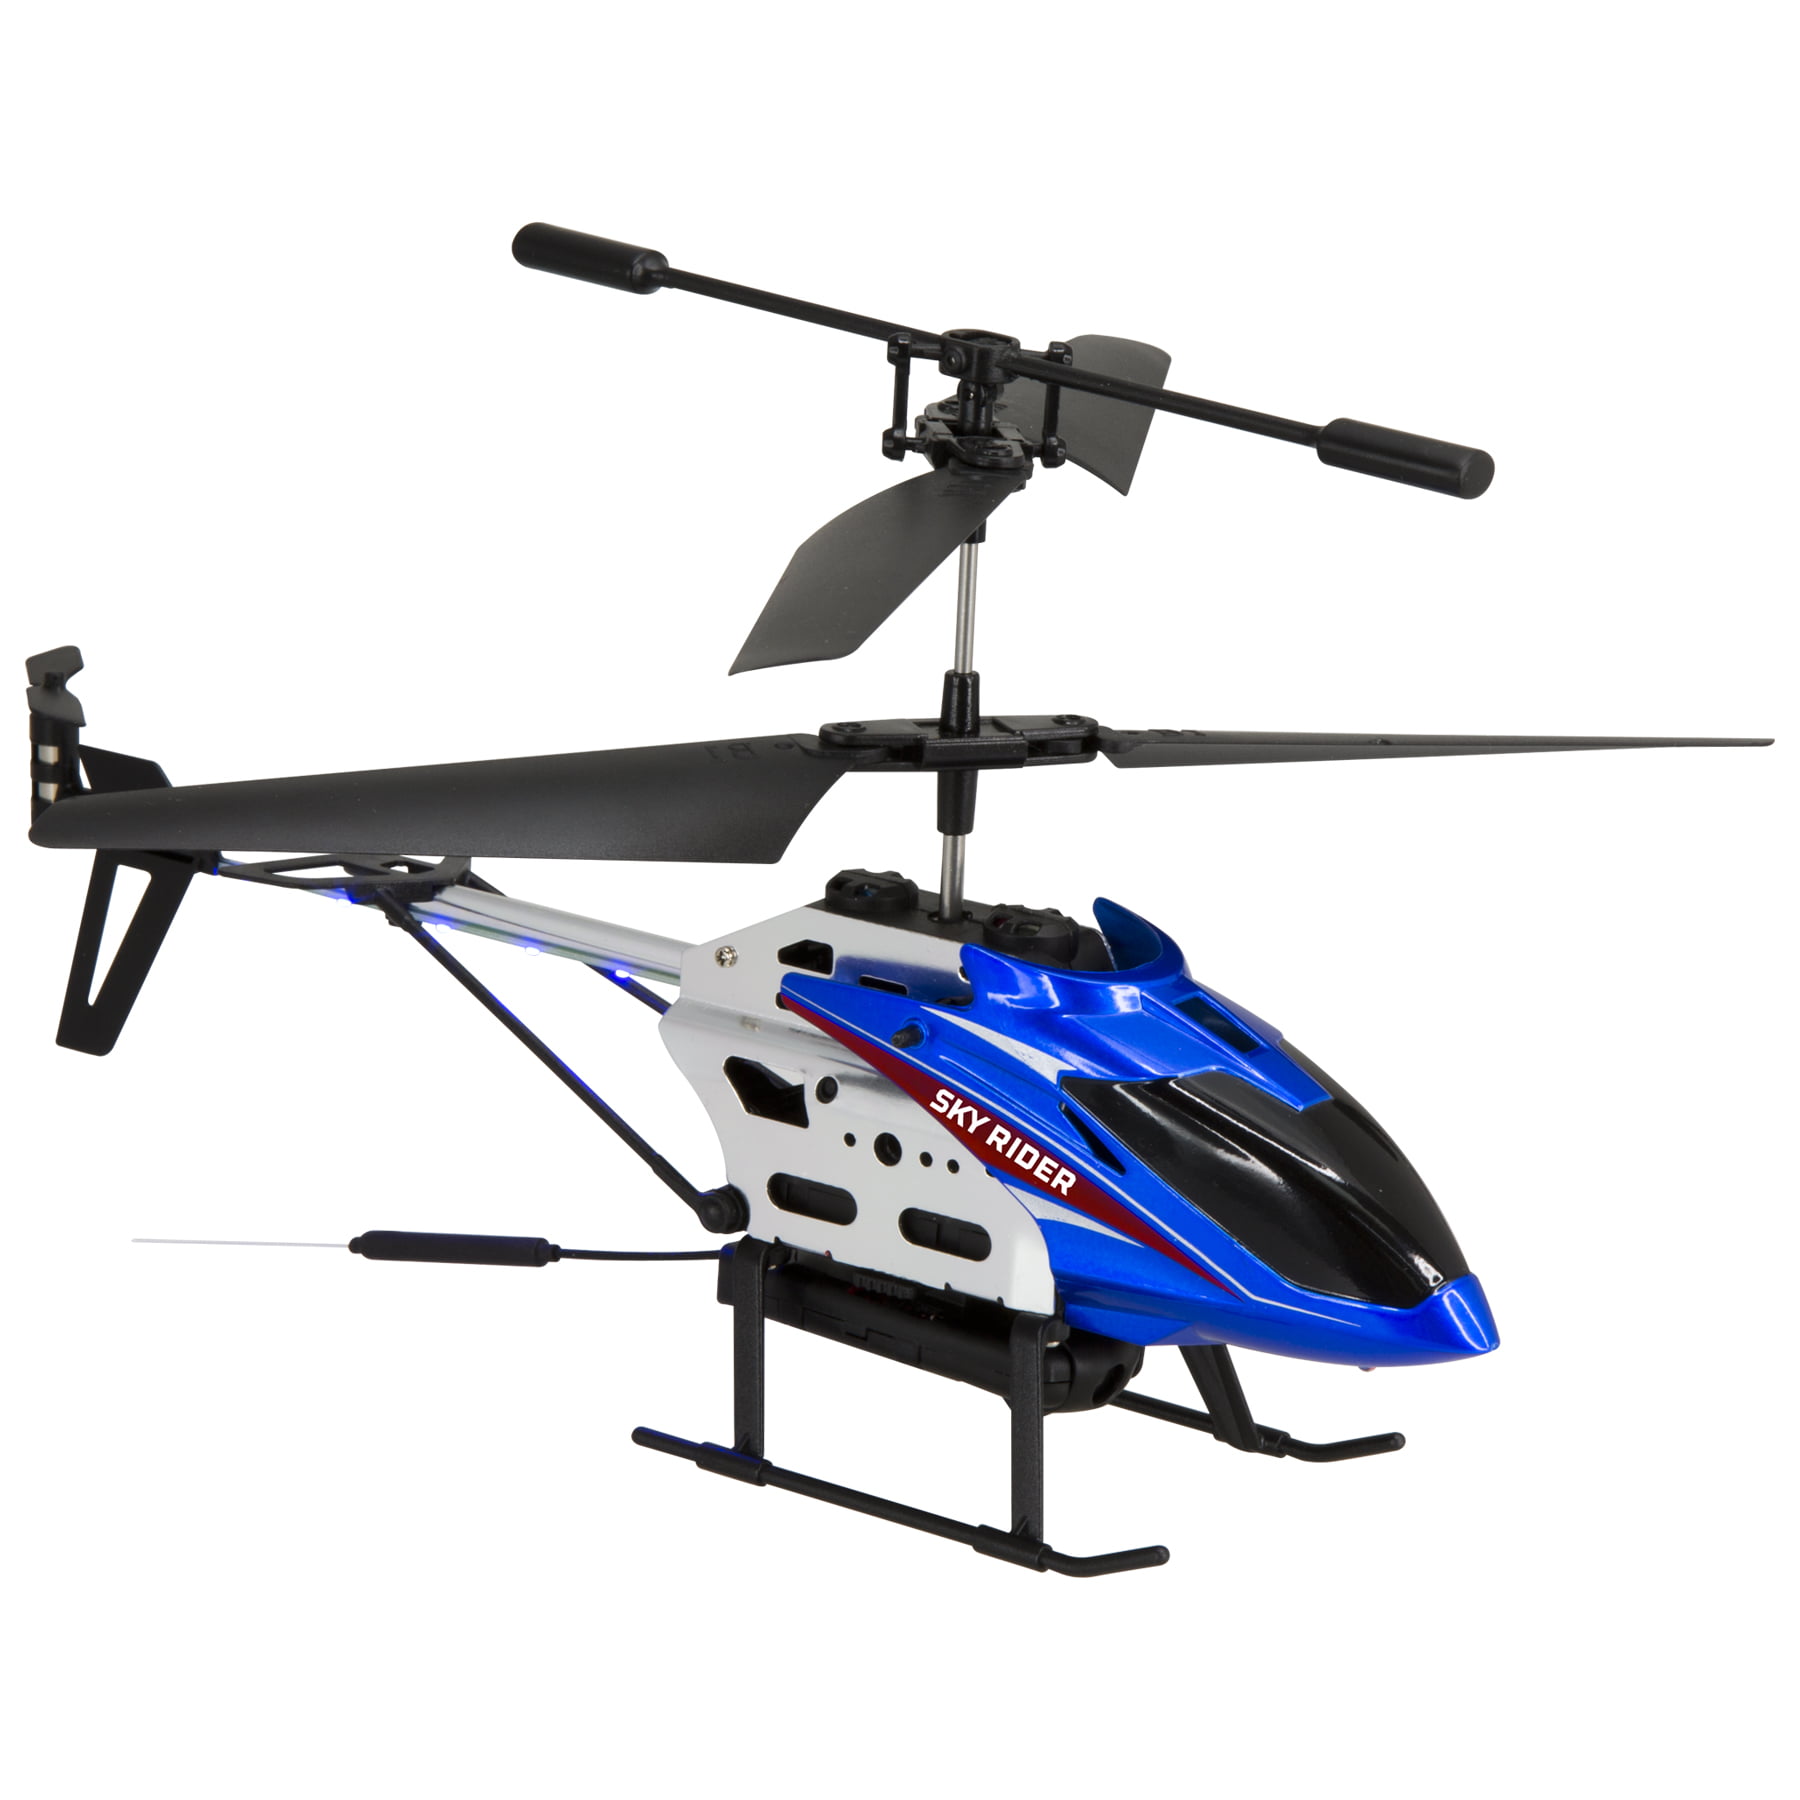 solopgang Belyse Indgang Sky Rider DRW241BU Helicopter Drone with Wi-Fi Camera, Blue - Walmart.com